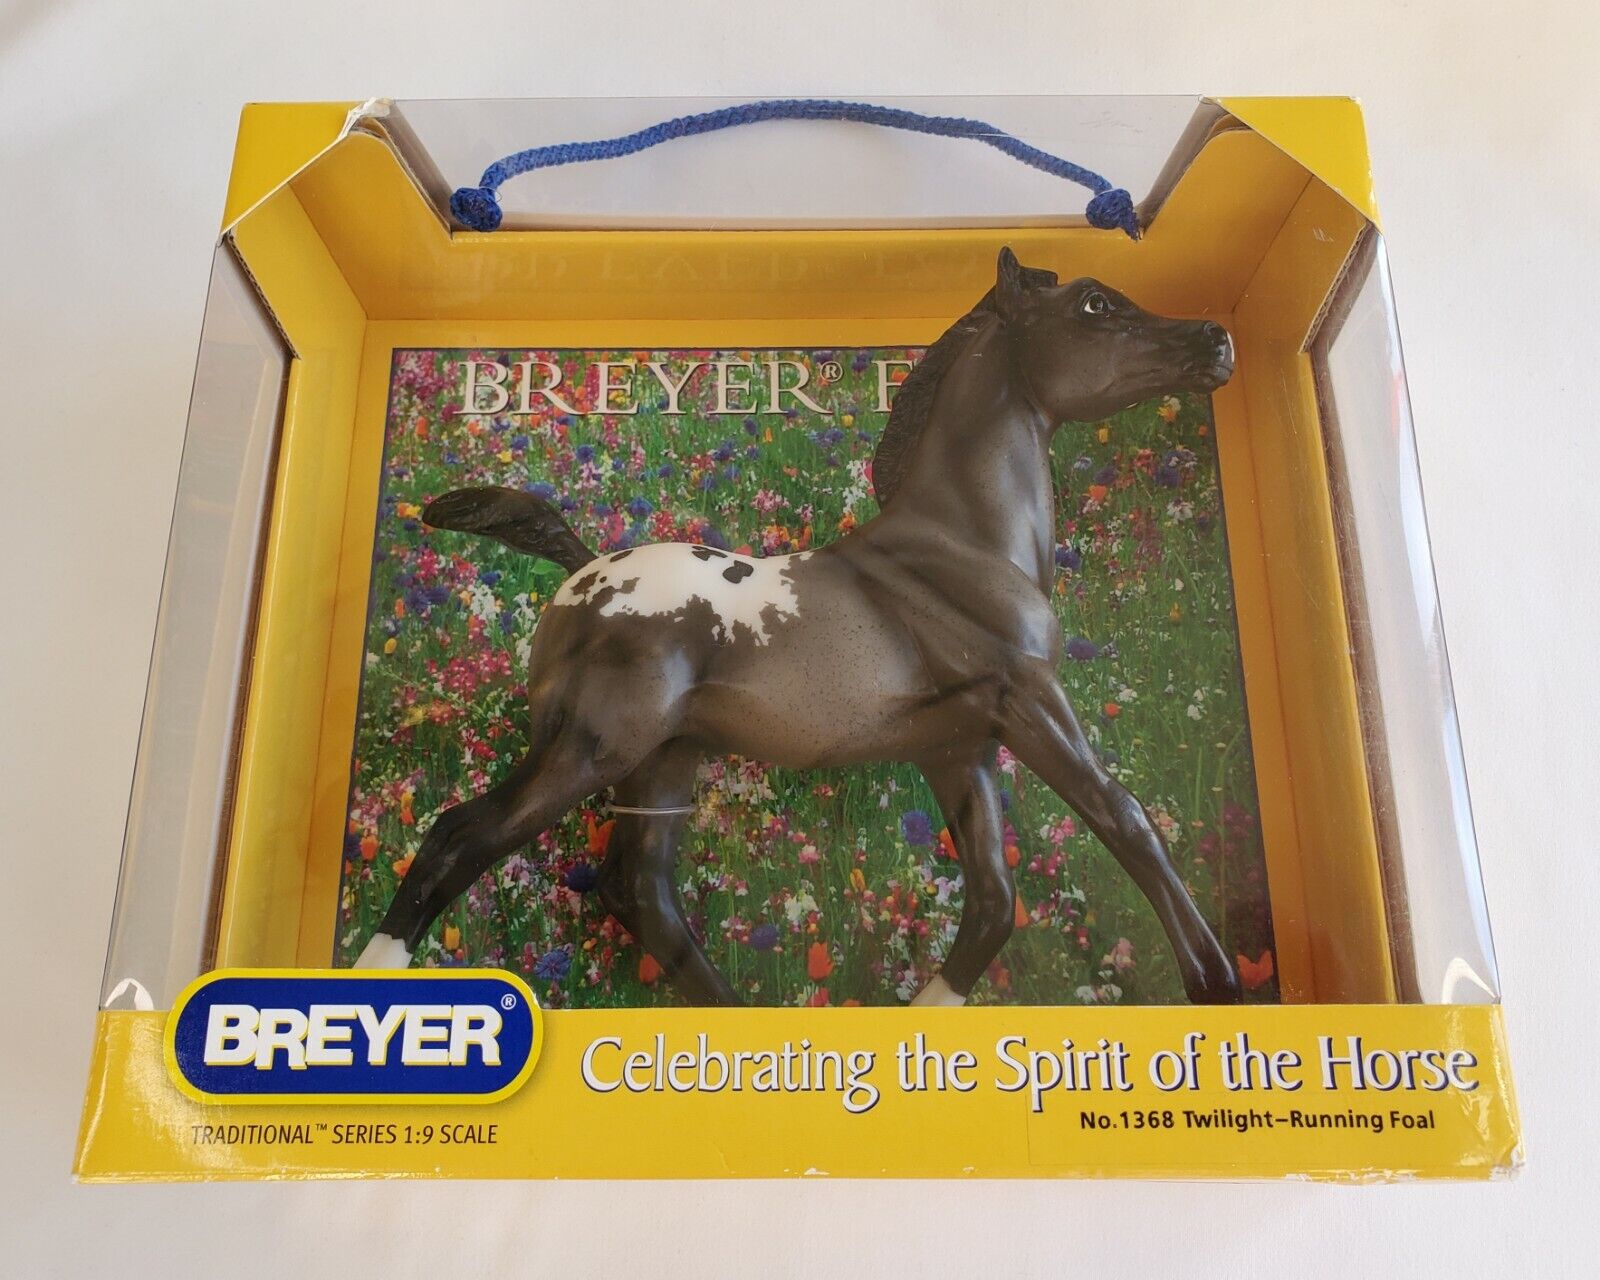 Breyer Twilight Running Foal Traditional Series 1:9 Scale Horse # 1368 2010 New